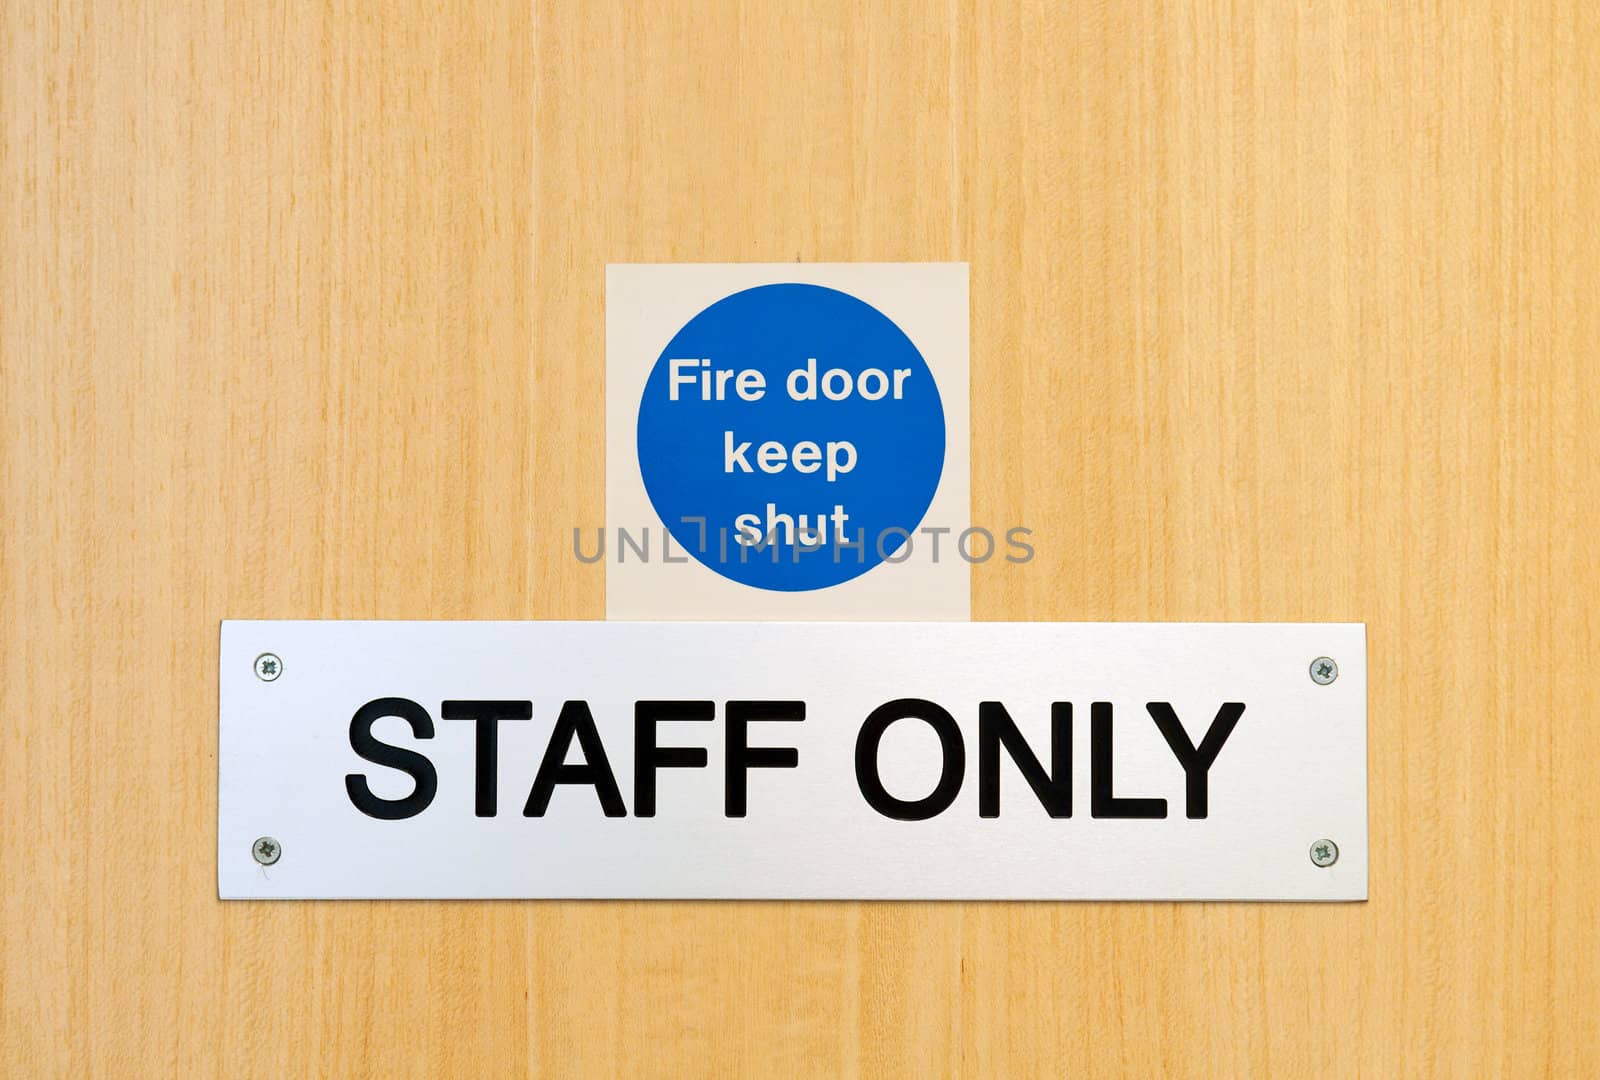 staff only door sign outside workplace (suitable for laboratory, office, restaurants, other)